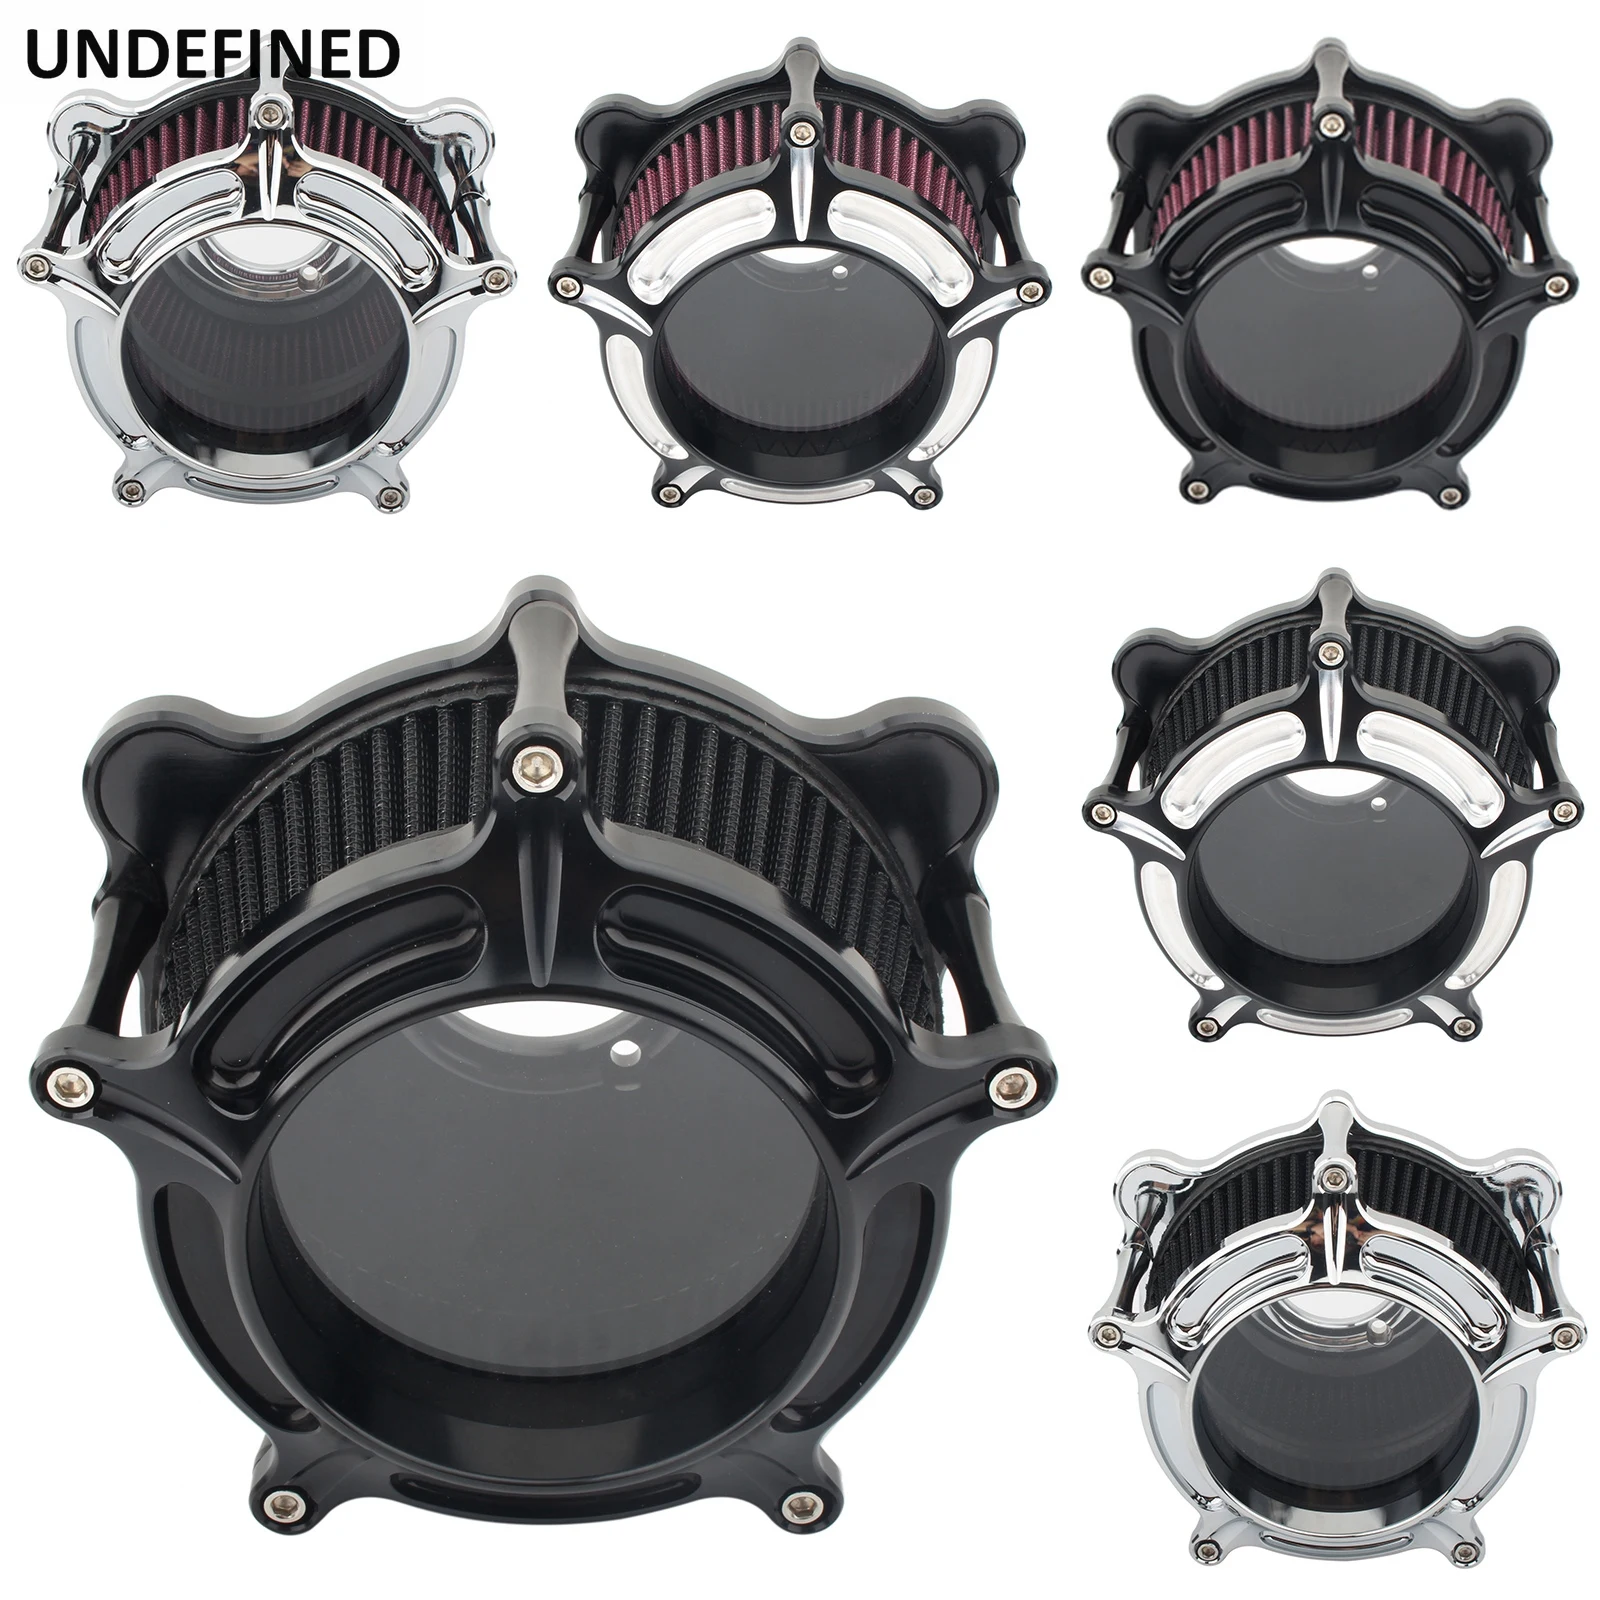 

CNC Air Cleaner Intake Filter For Harley Touring Electra Street Glide Road King Softail Fat Boy Dyna/FXR Sportster XL 883 1200